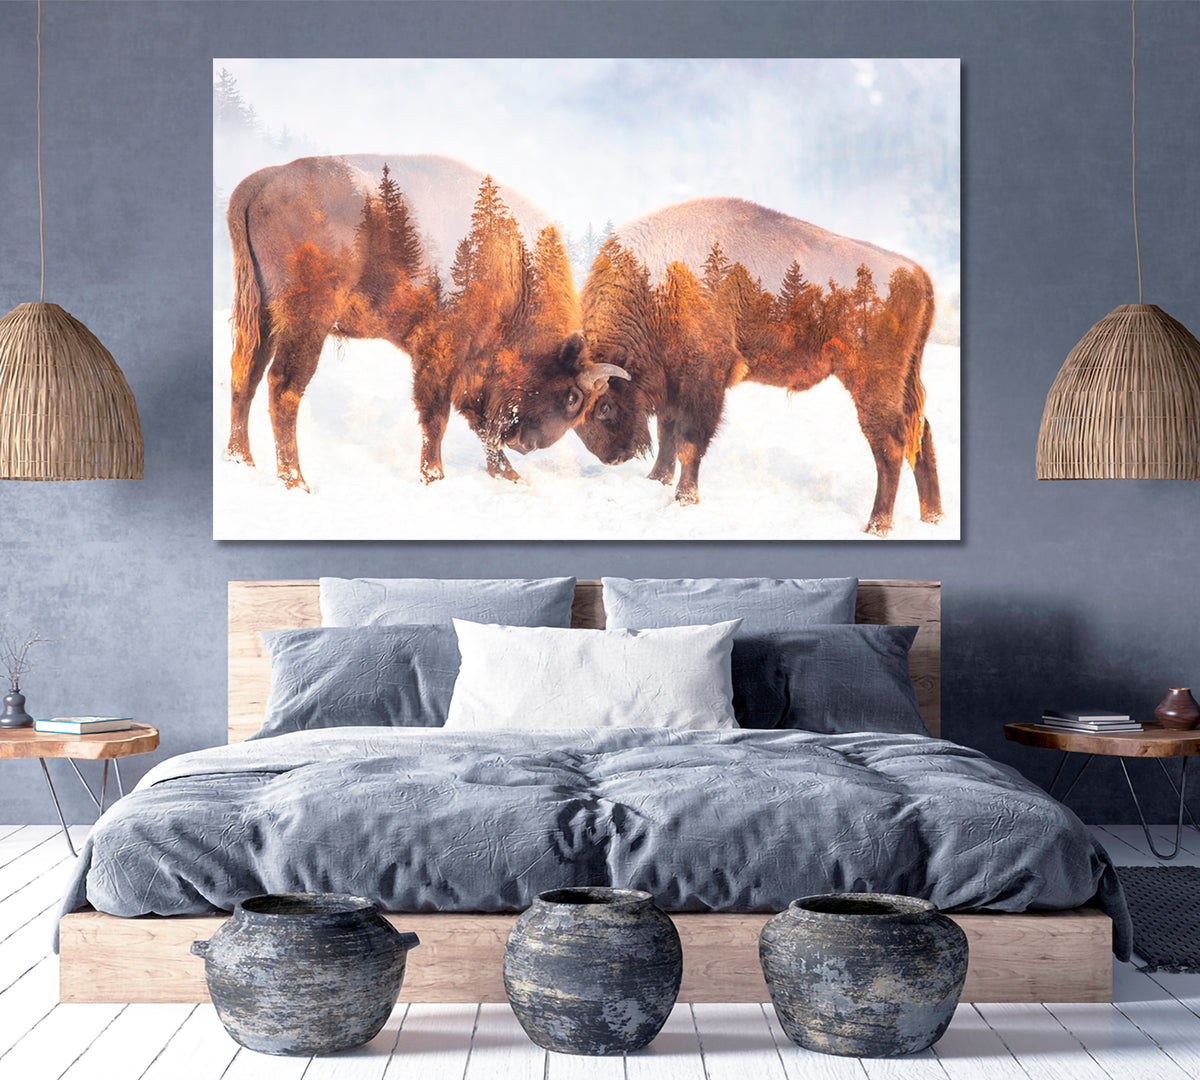 Double Exposure Two Wild Bison Fighting And Pine Trees Wild Life Framed Art Artesty 1 panel 24" x 16" 